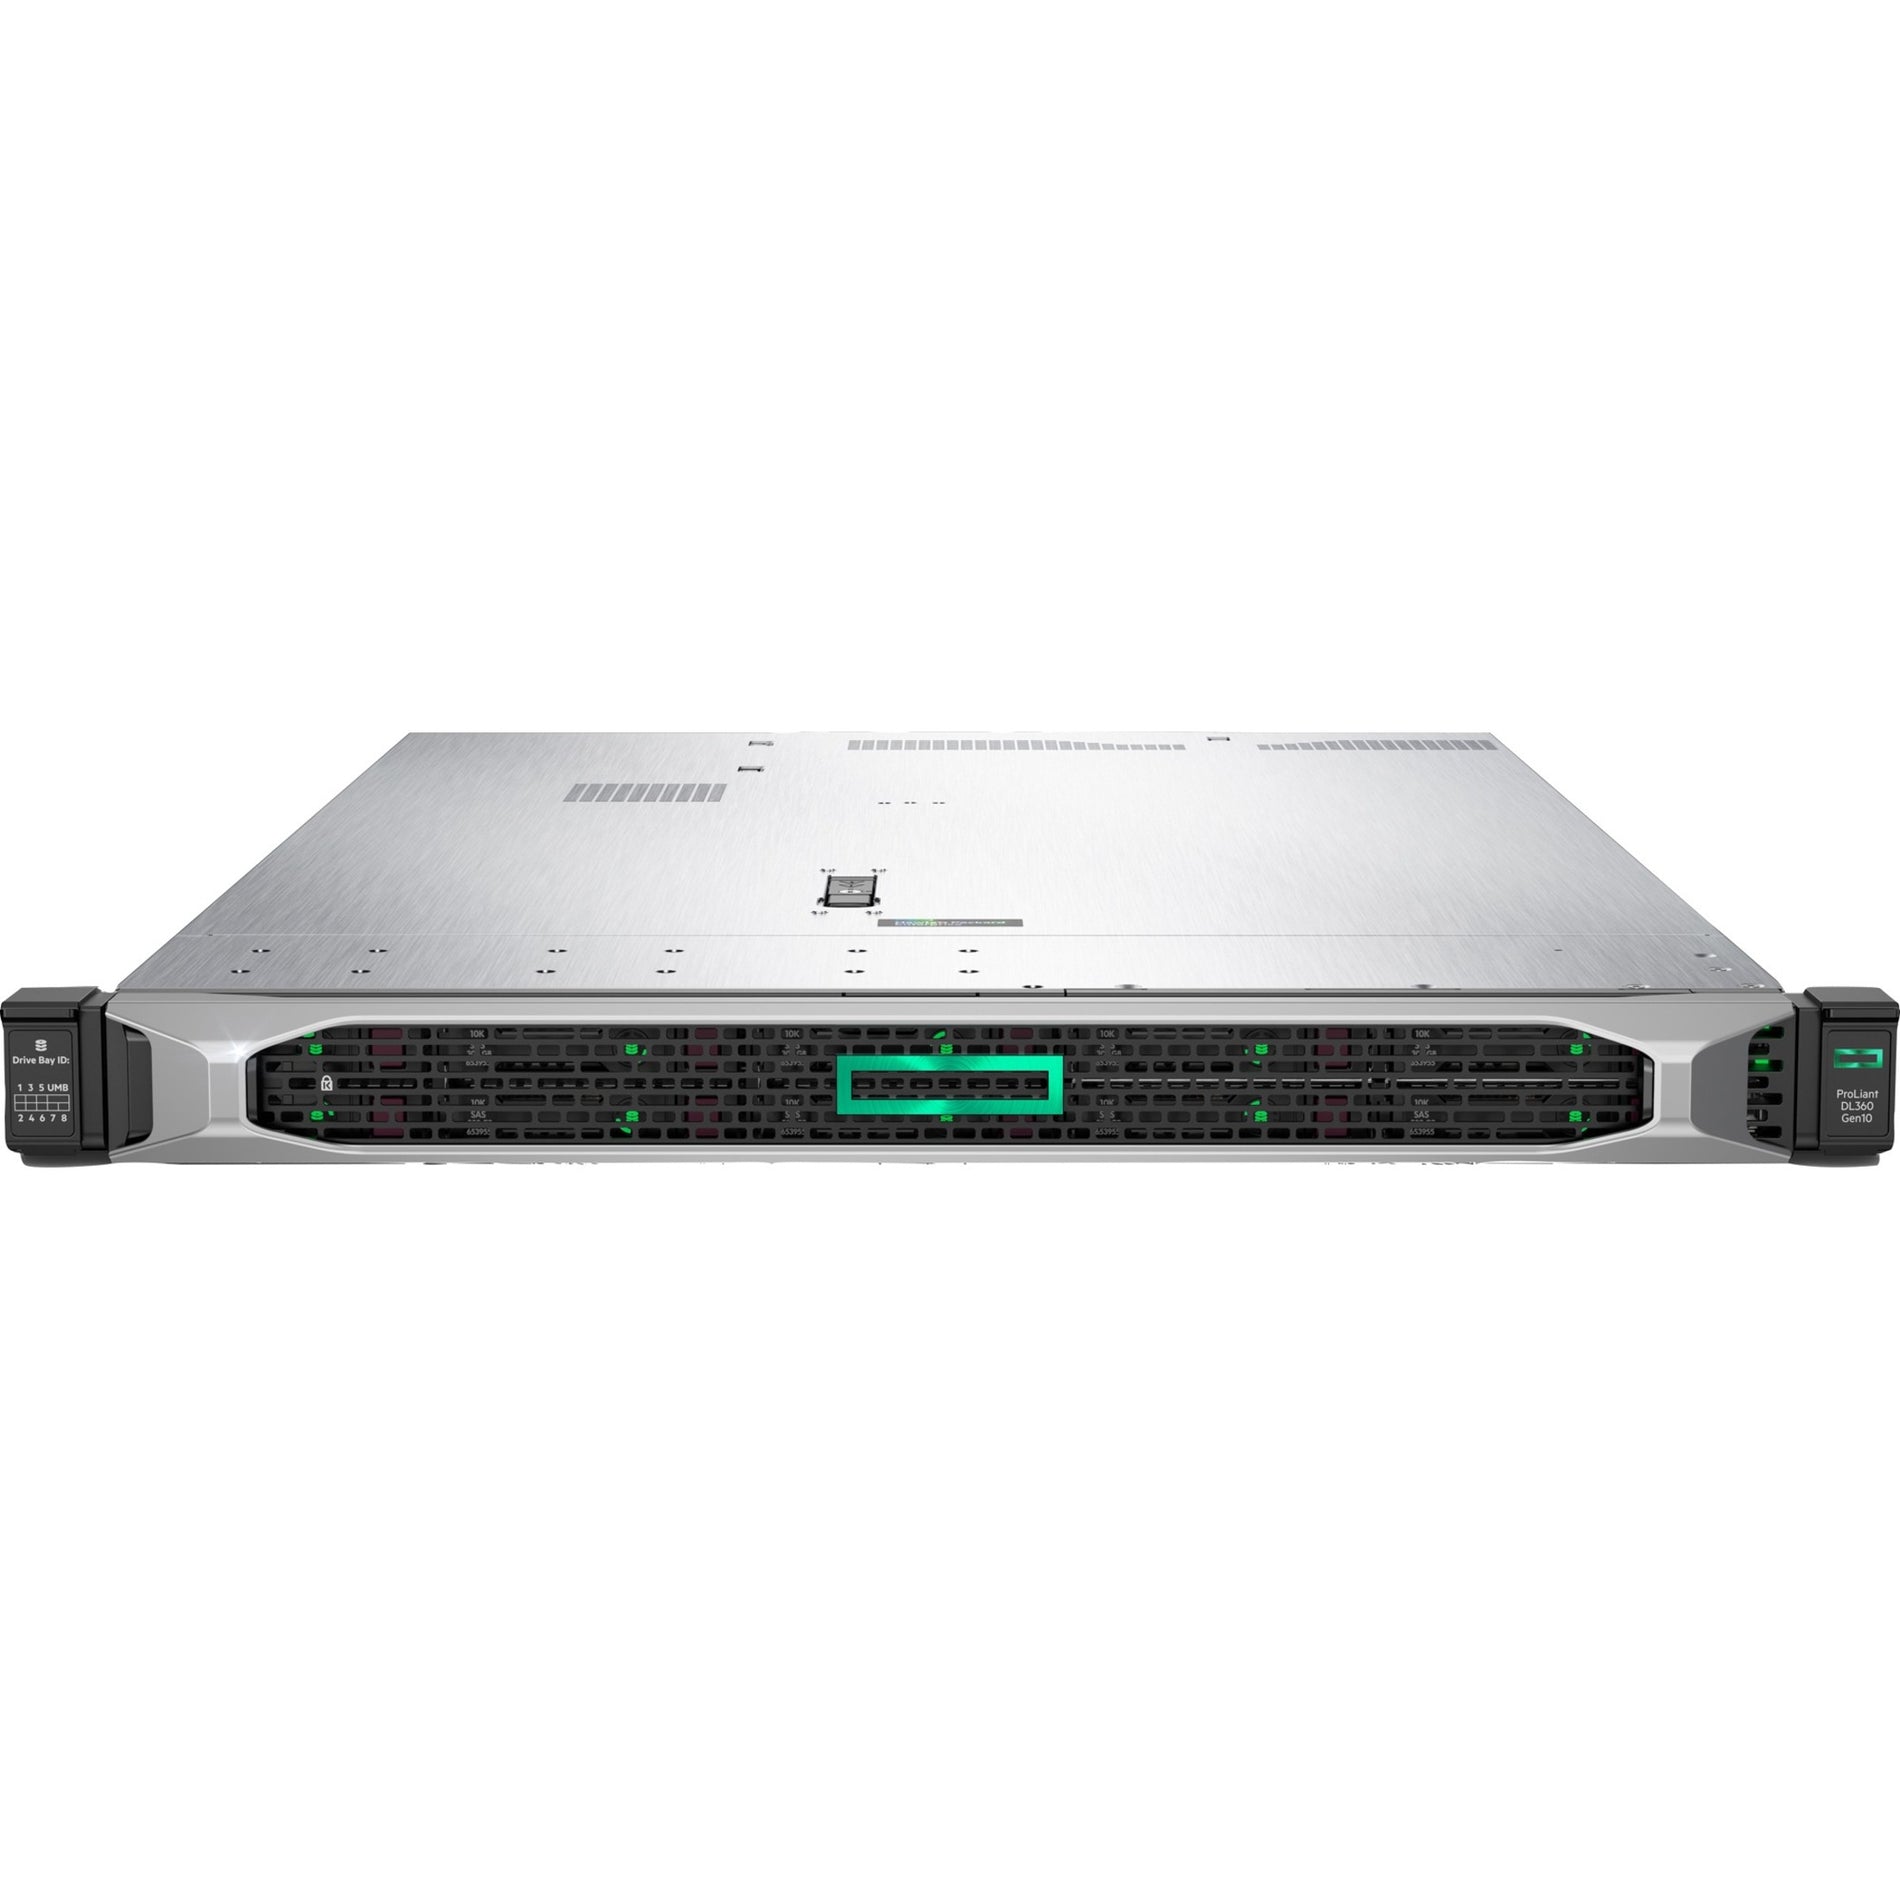 HPE ProLiant DL360 Gen10 6248R 1P 32GB-R S100i NC 8SFF 800W PS Server [Discontinued]